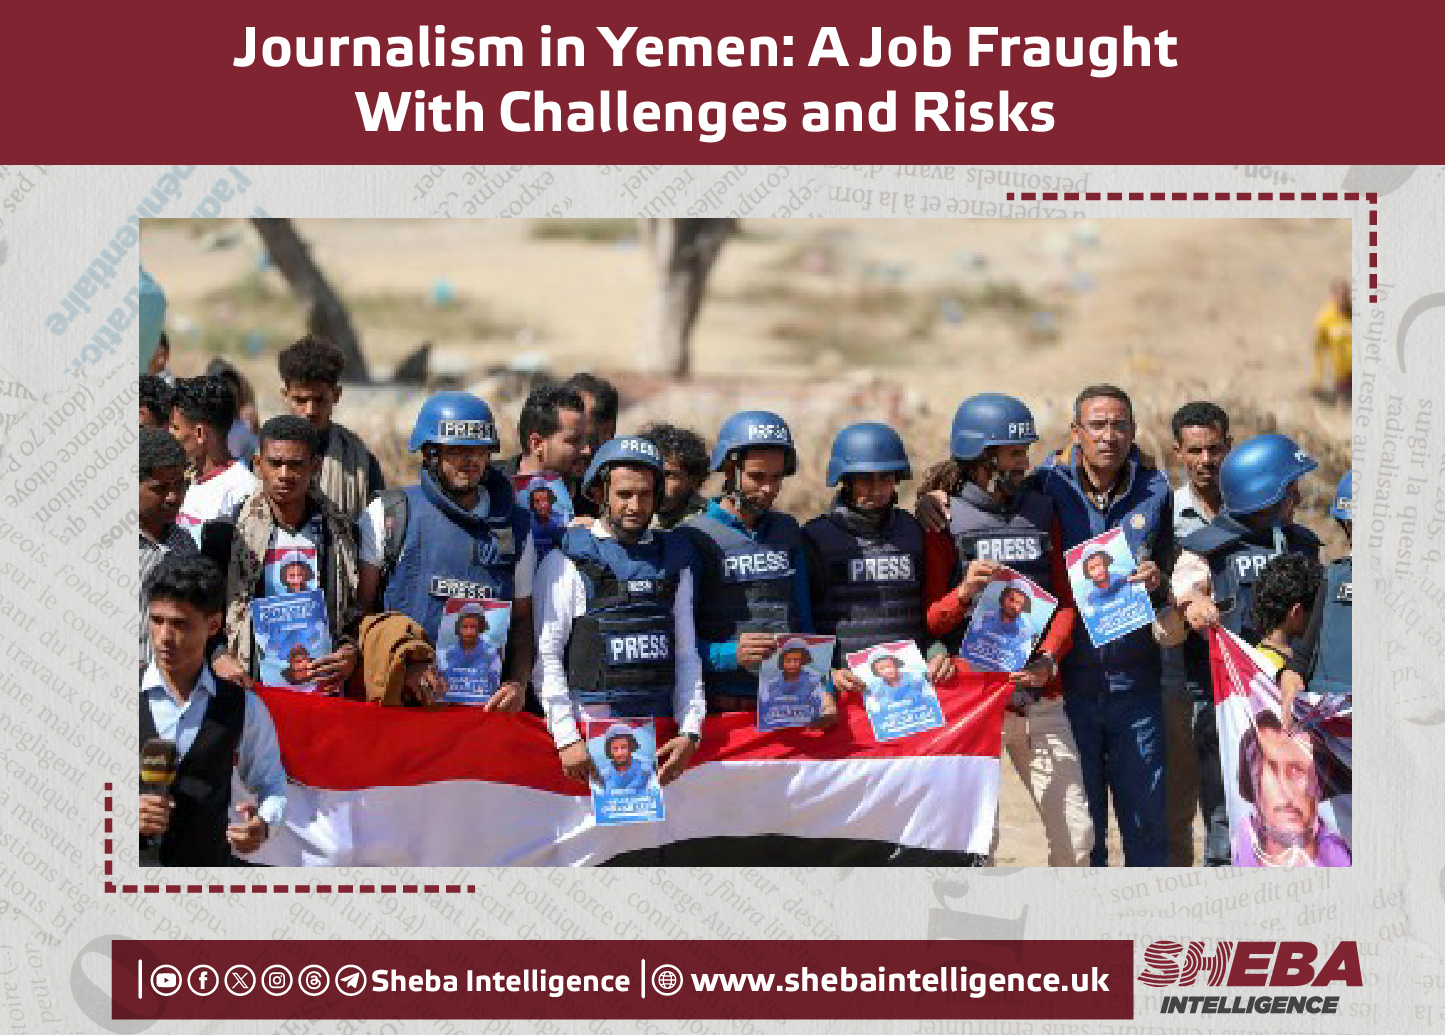 Journalism in Yemen: A Job Fraught With Challenges and Risks